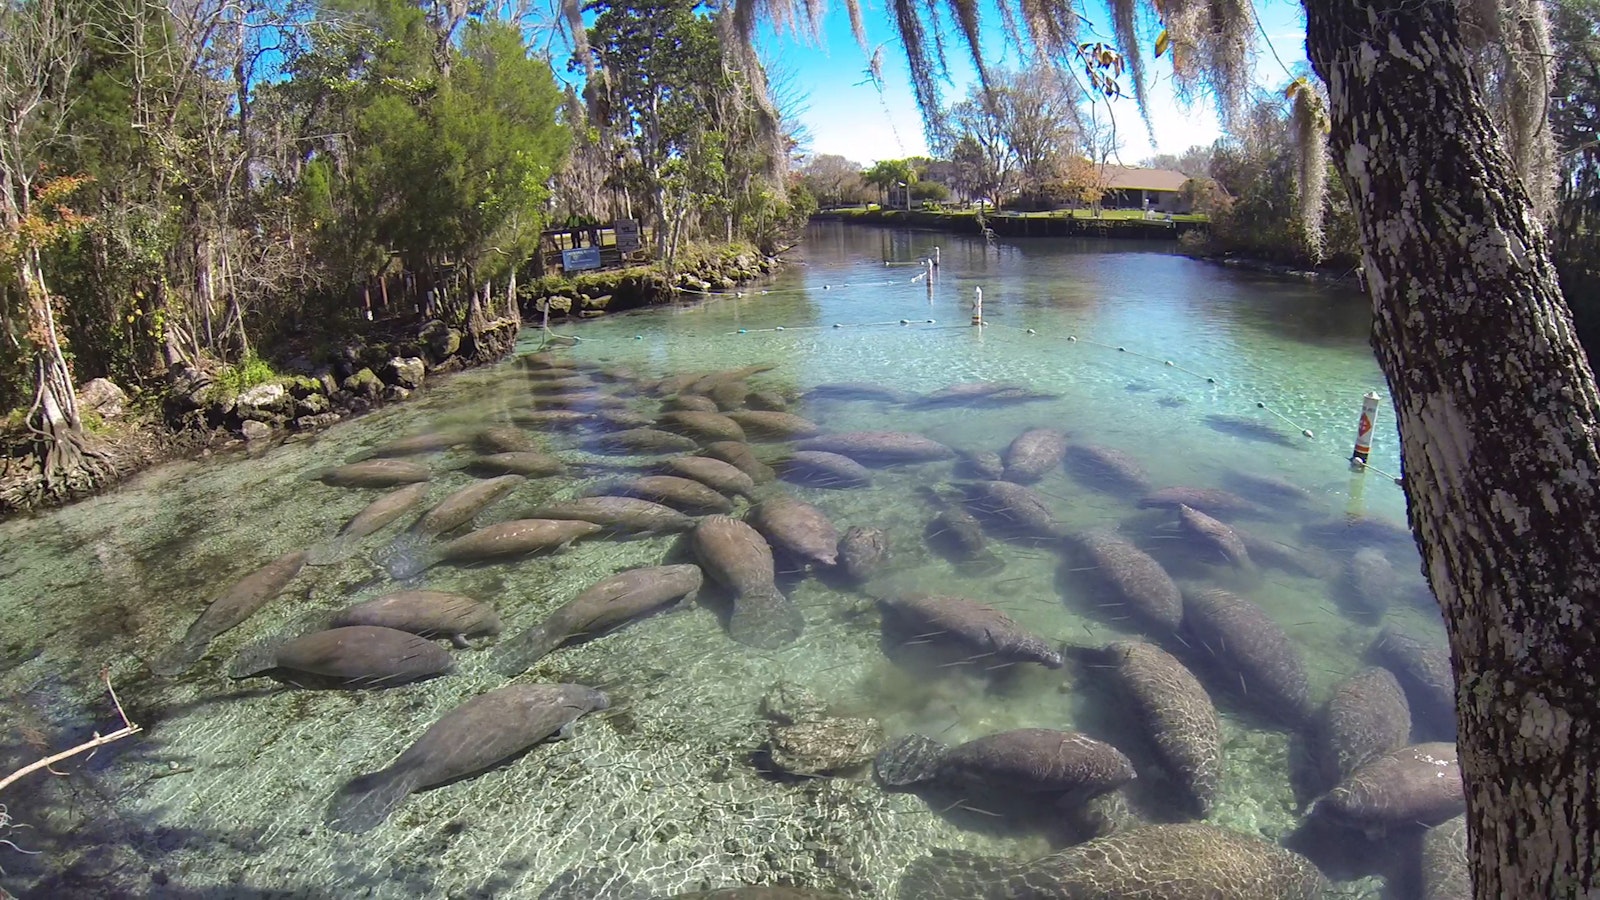 A herd of manatees gather in a part of a crystal clear river